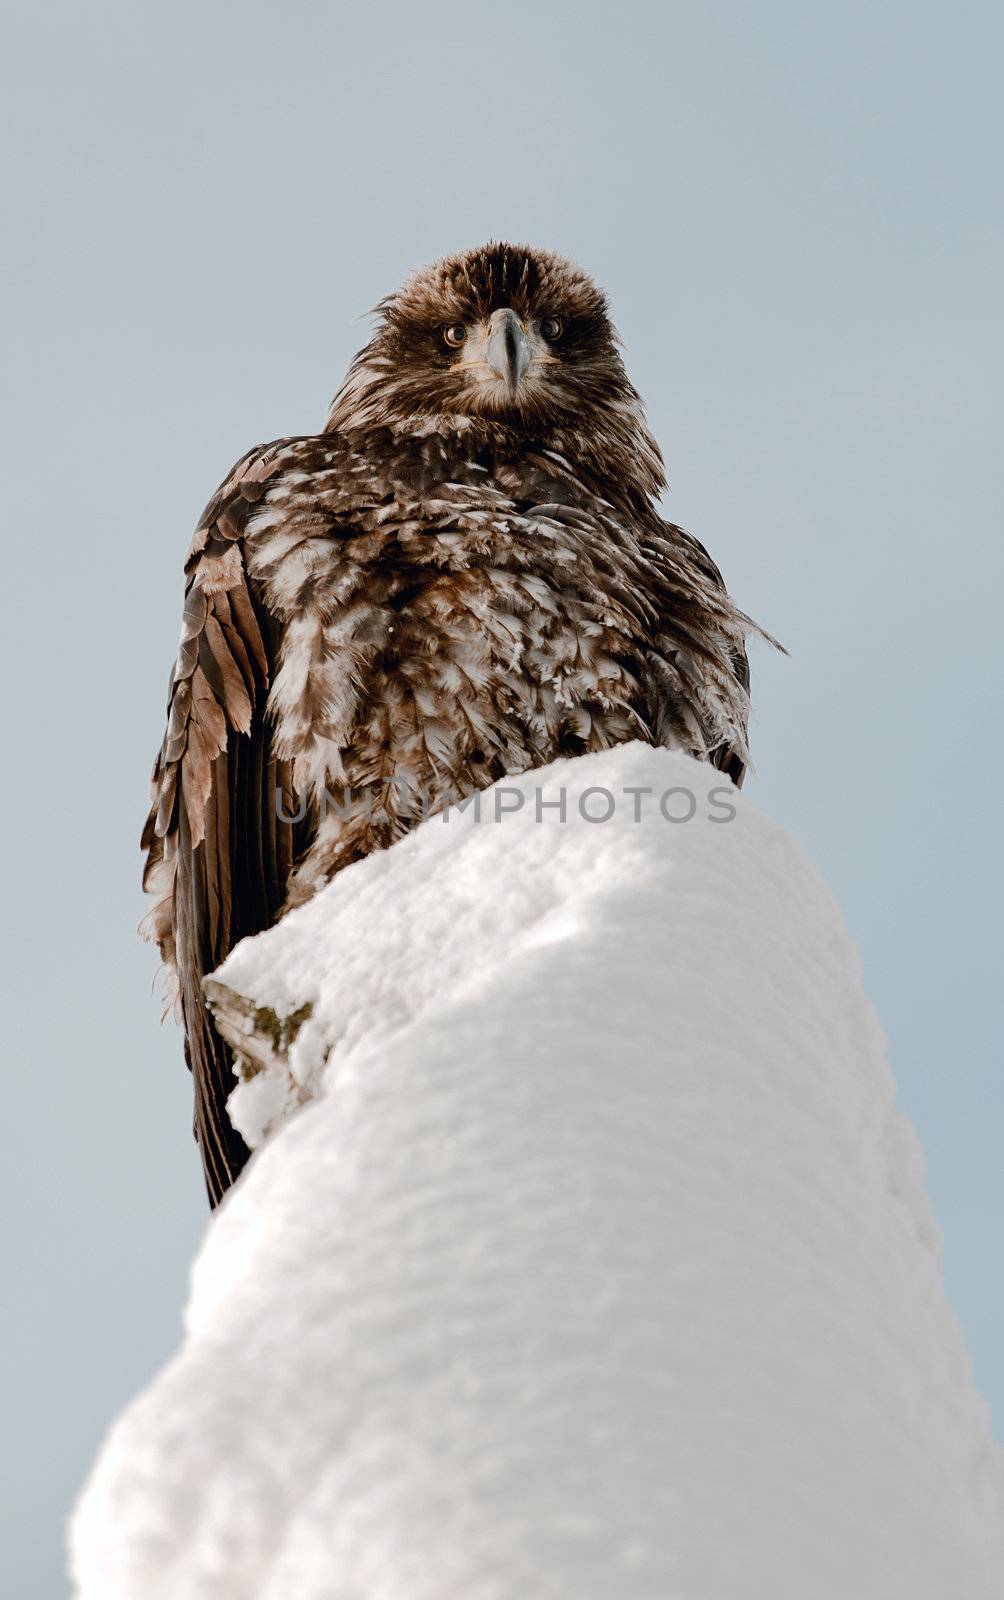 Bald eagle perched on snow covered tree by SURZ